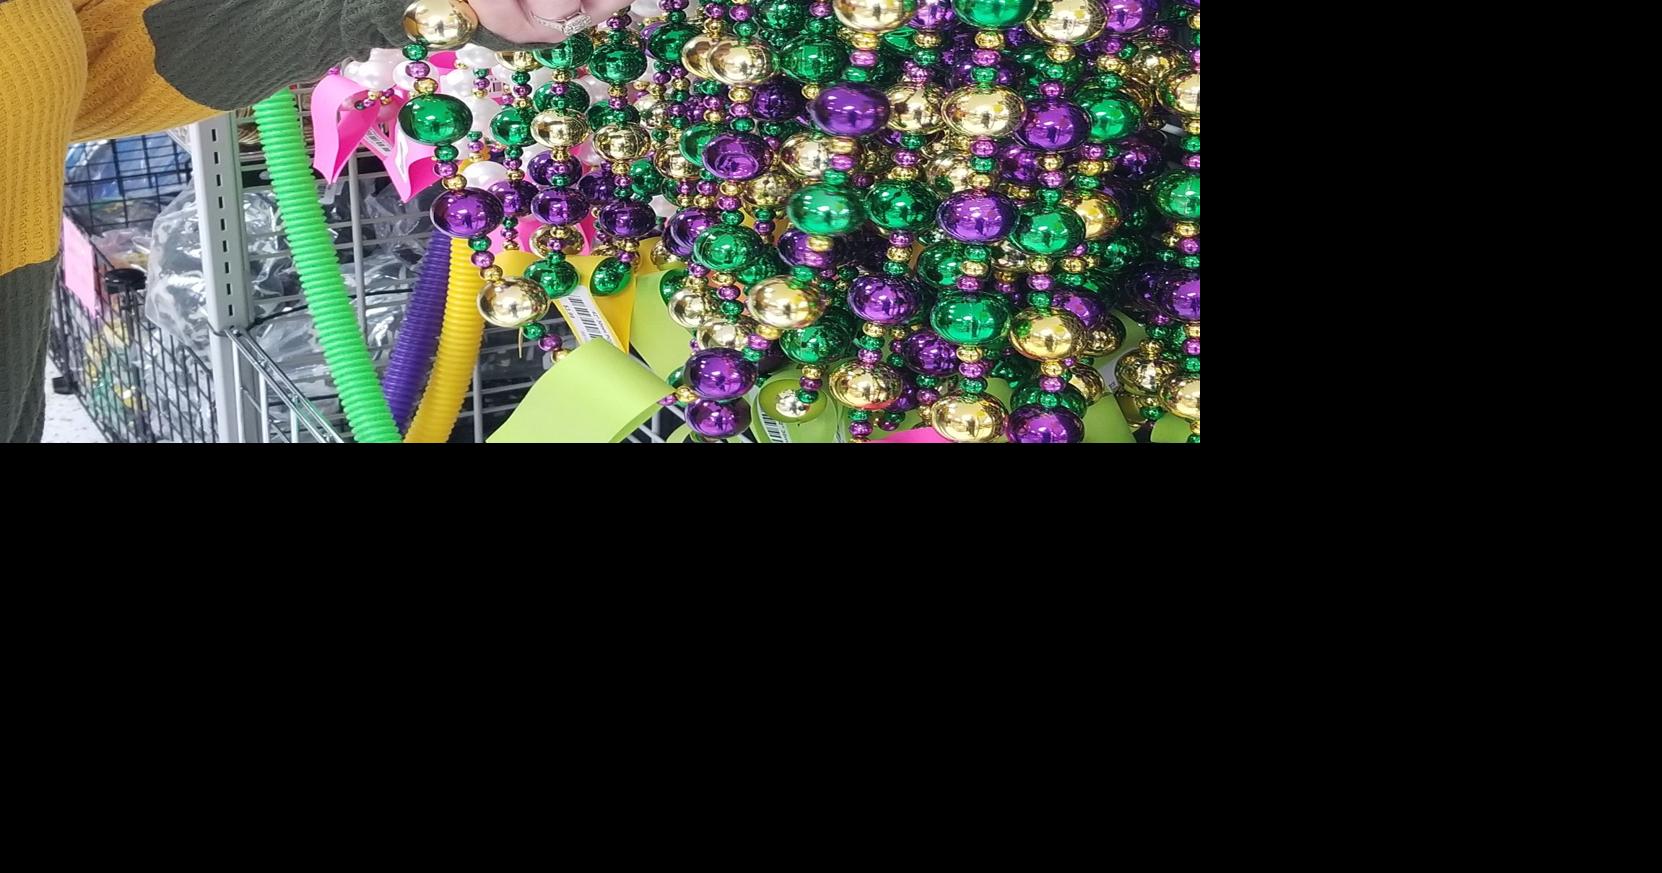 Hollywood Theme Mardi Gras Beads from Beads by the Dozen, New Orleans